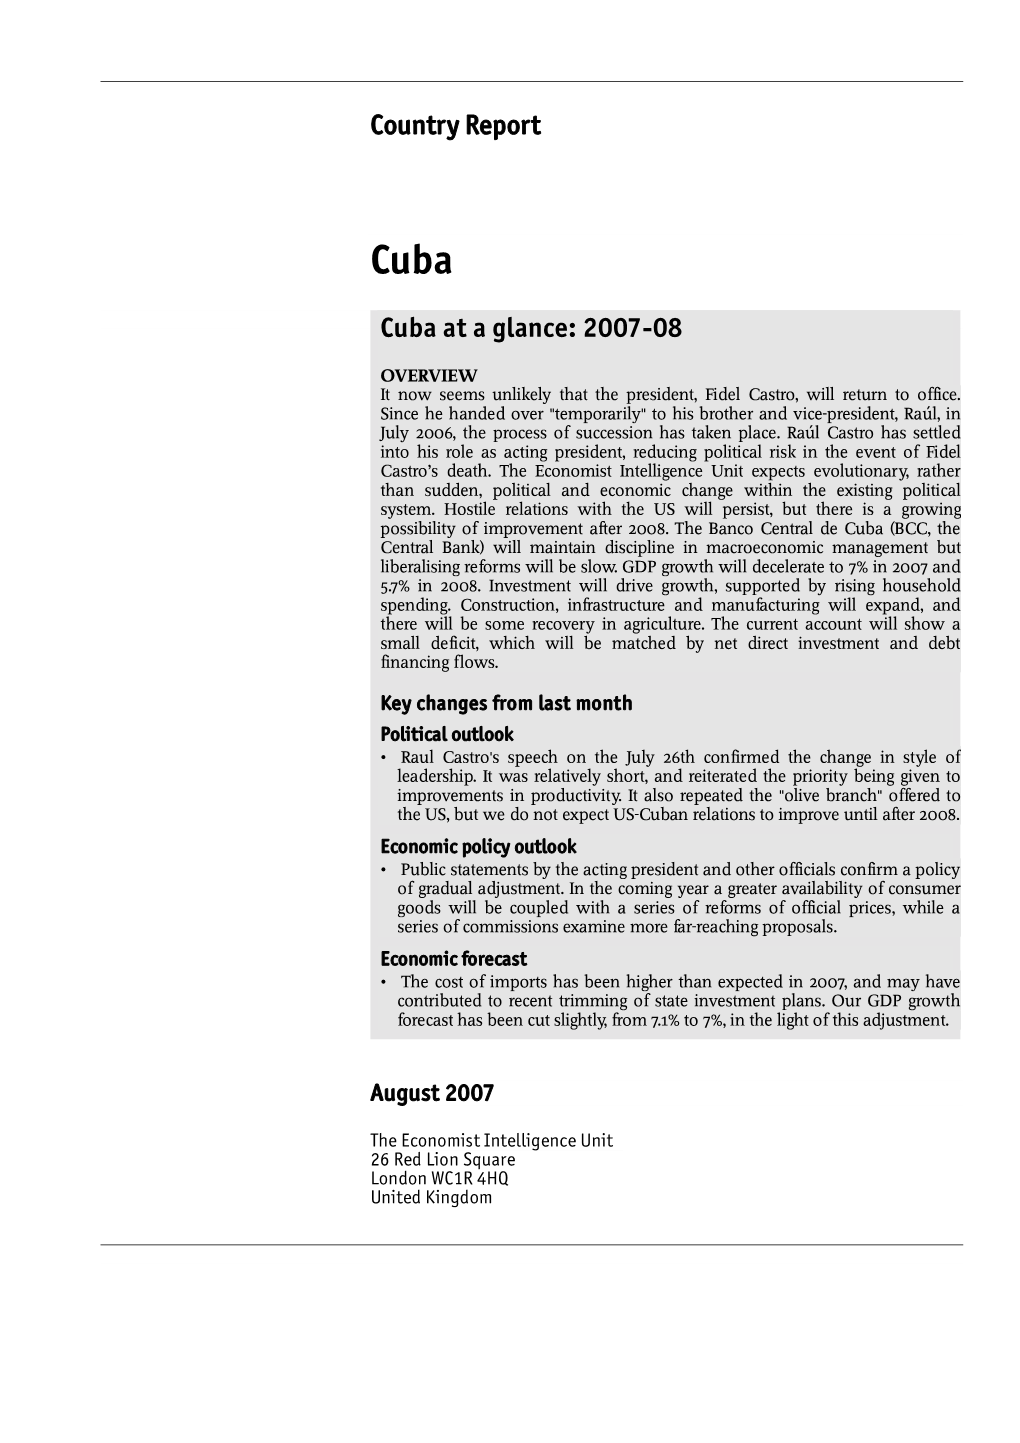 Country Report Cuba at a Glance: 2007-08